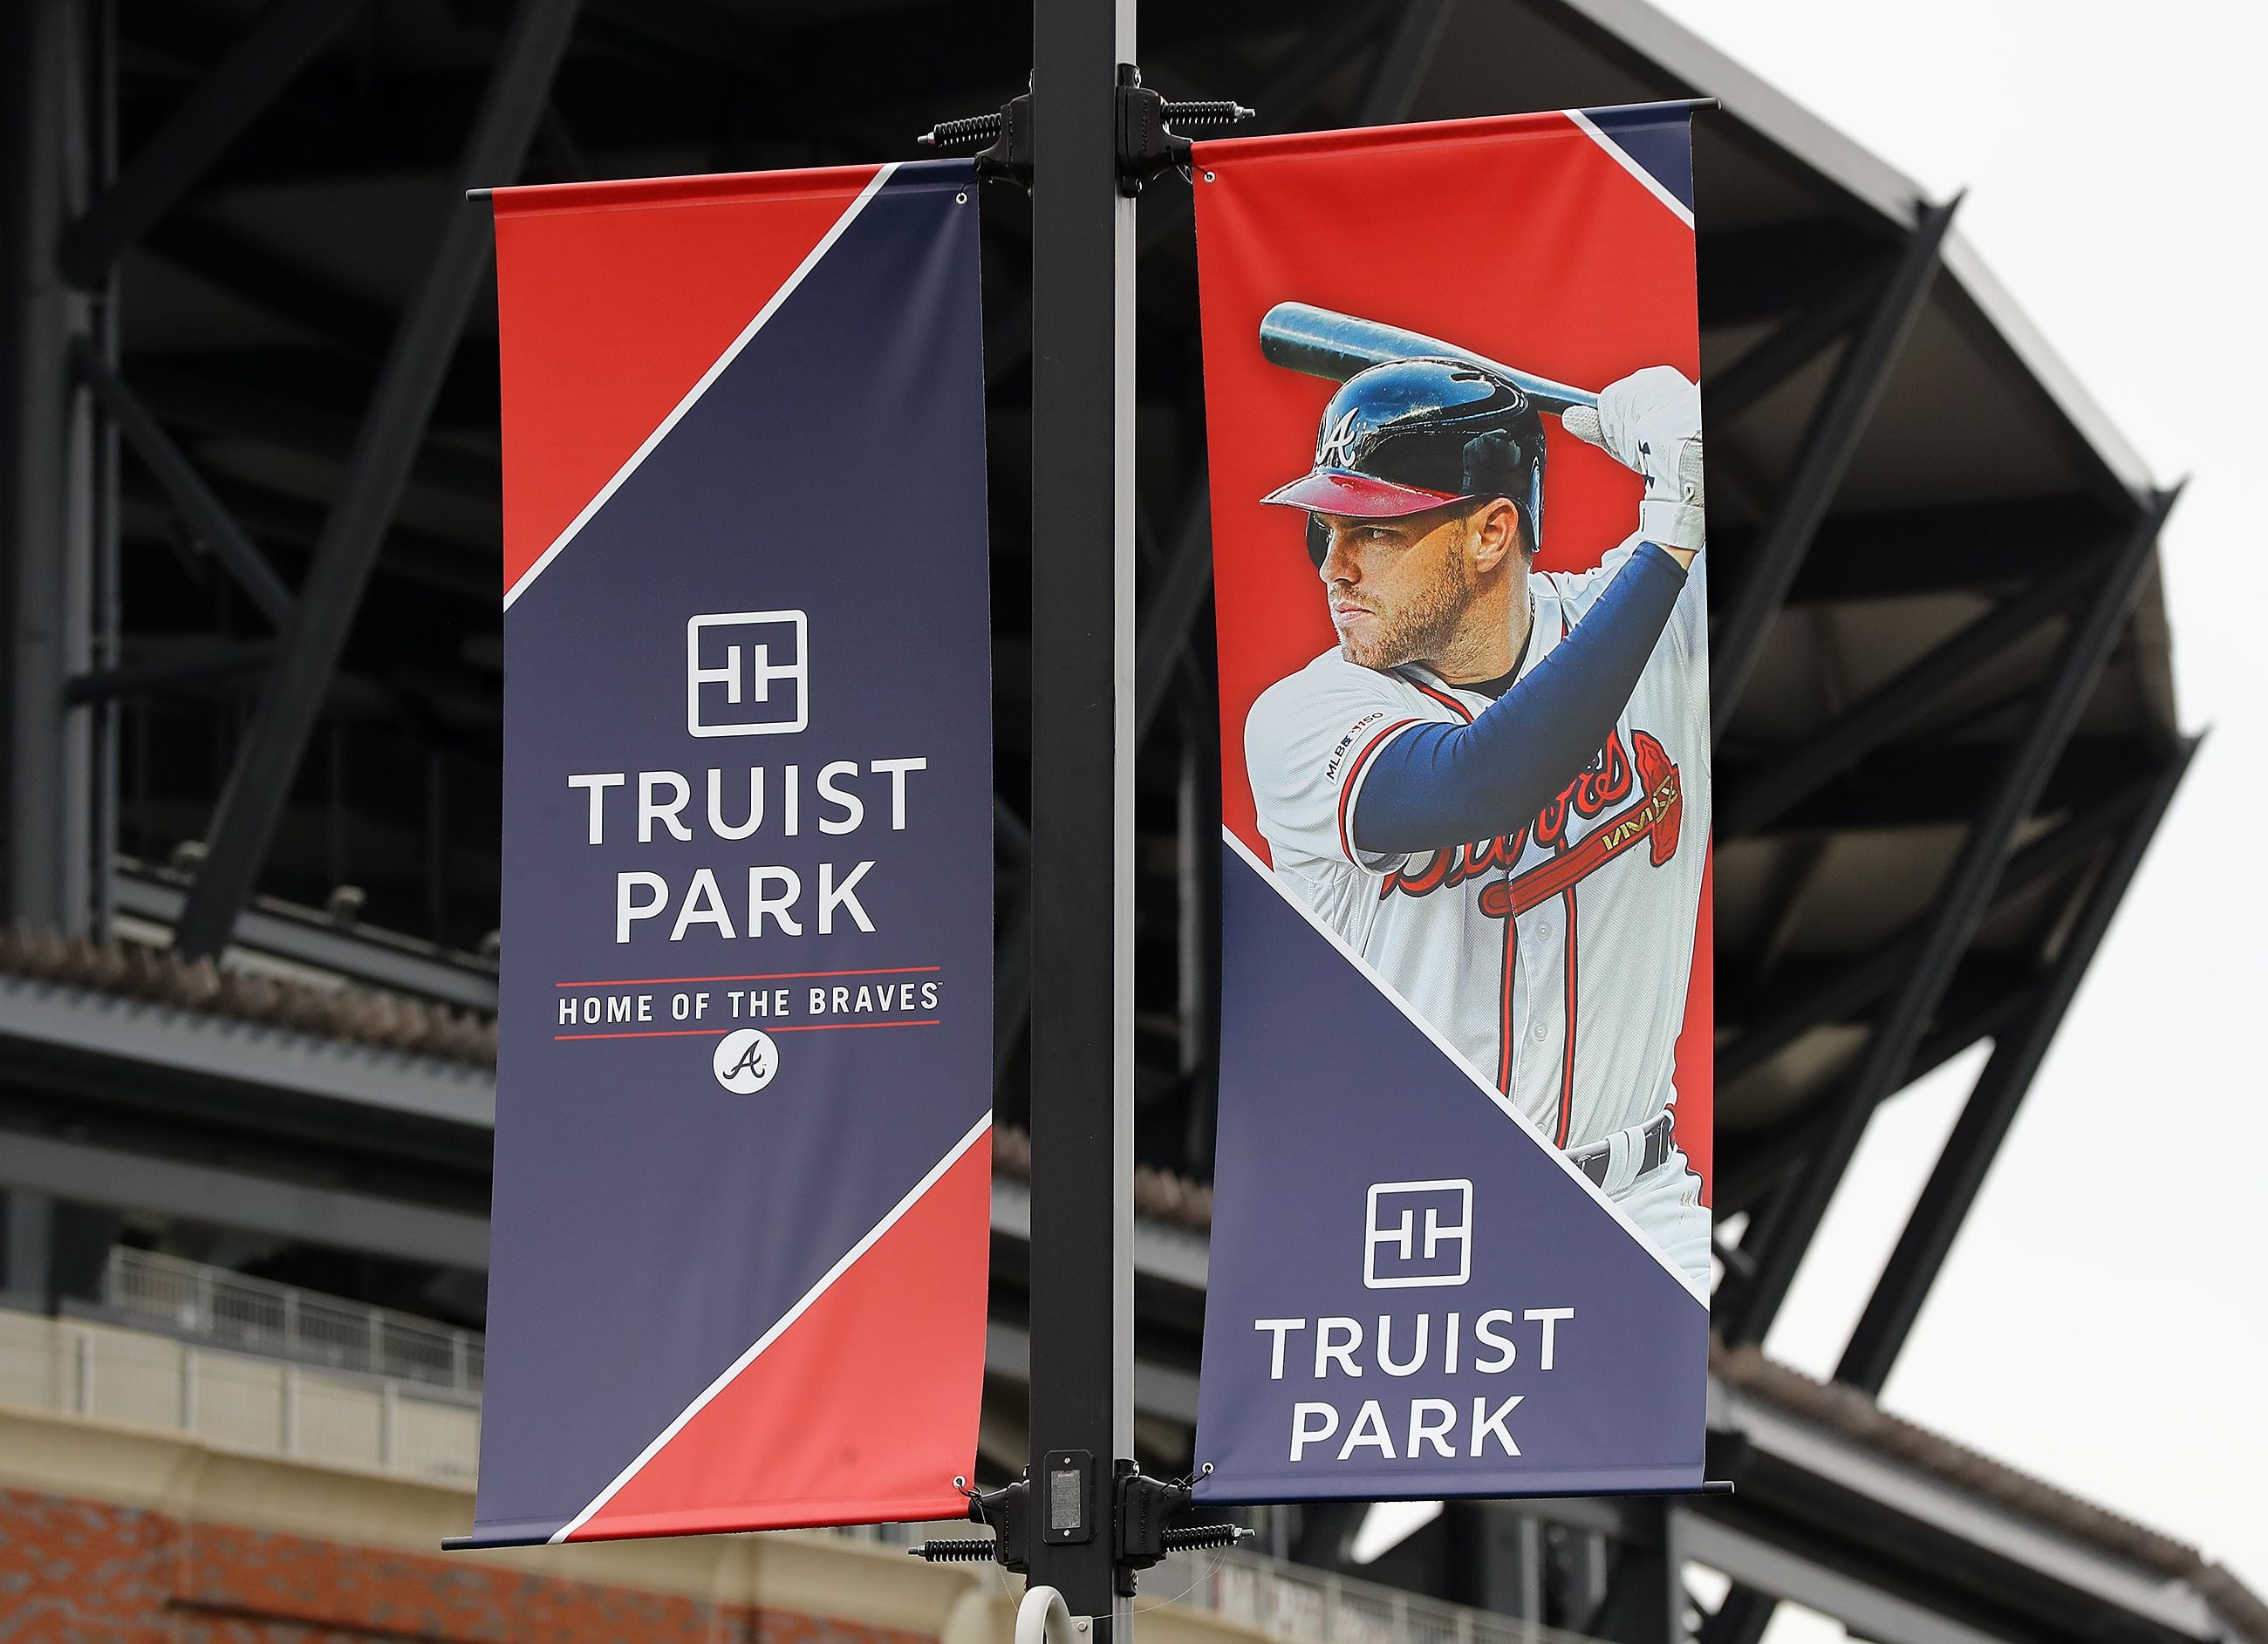 Truist Park on X: Parking Alert for today's noon #Braves vs. Red